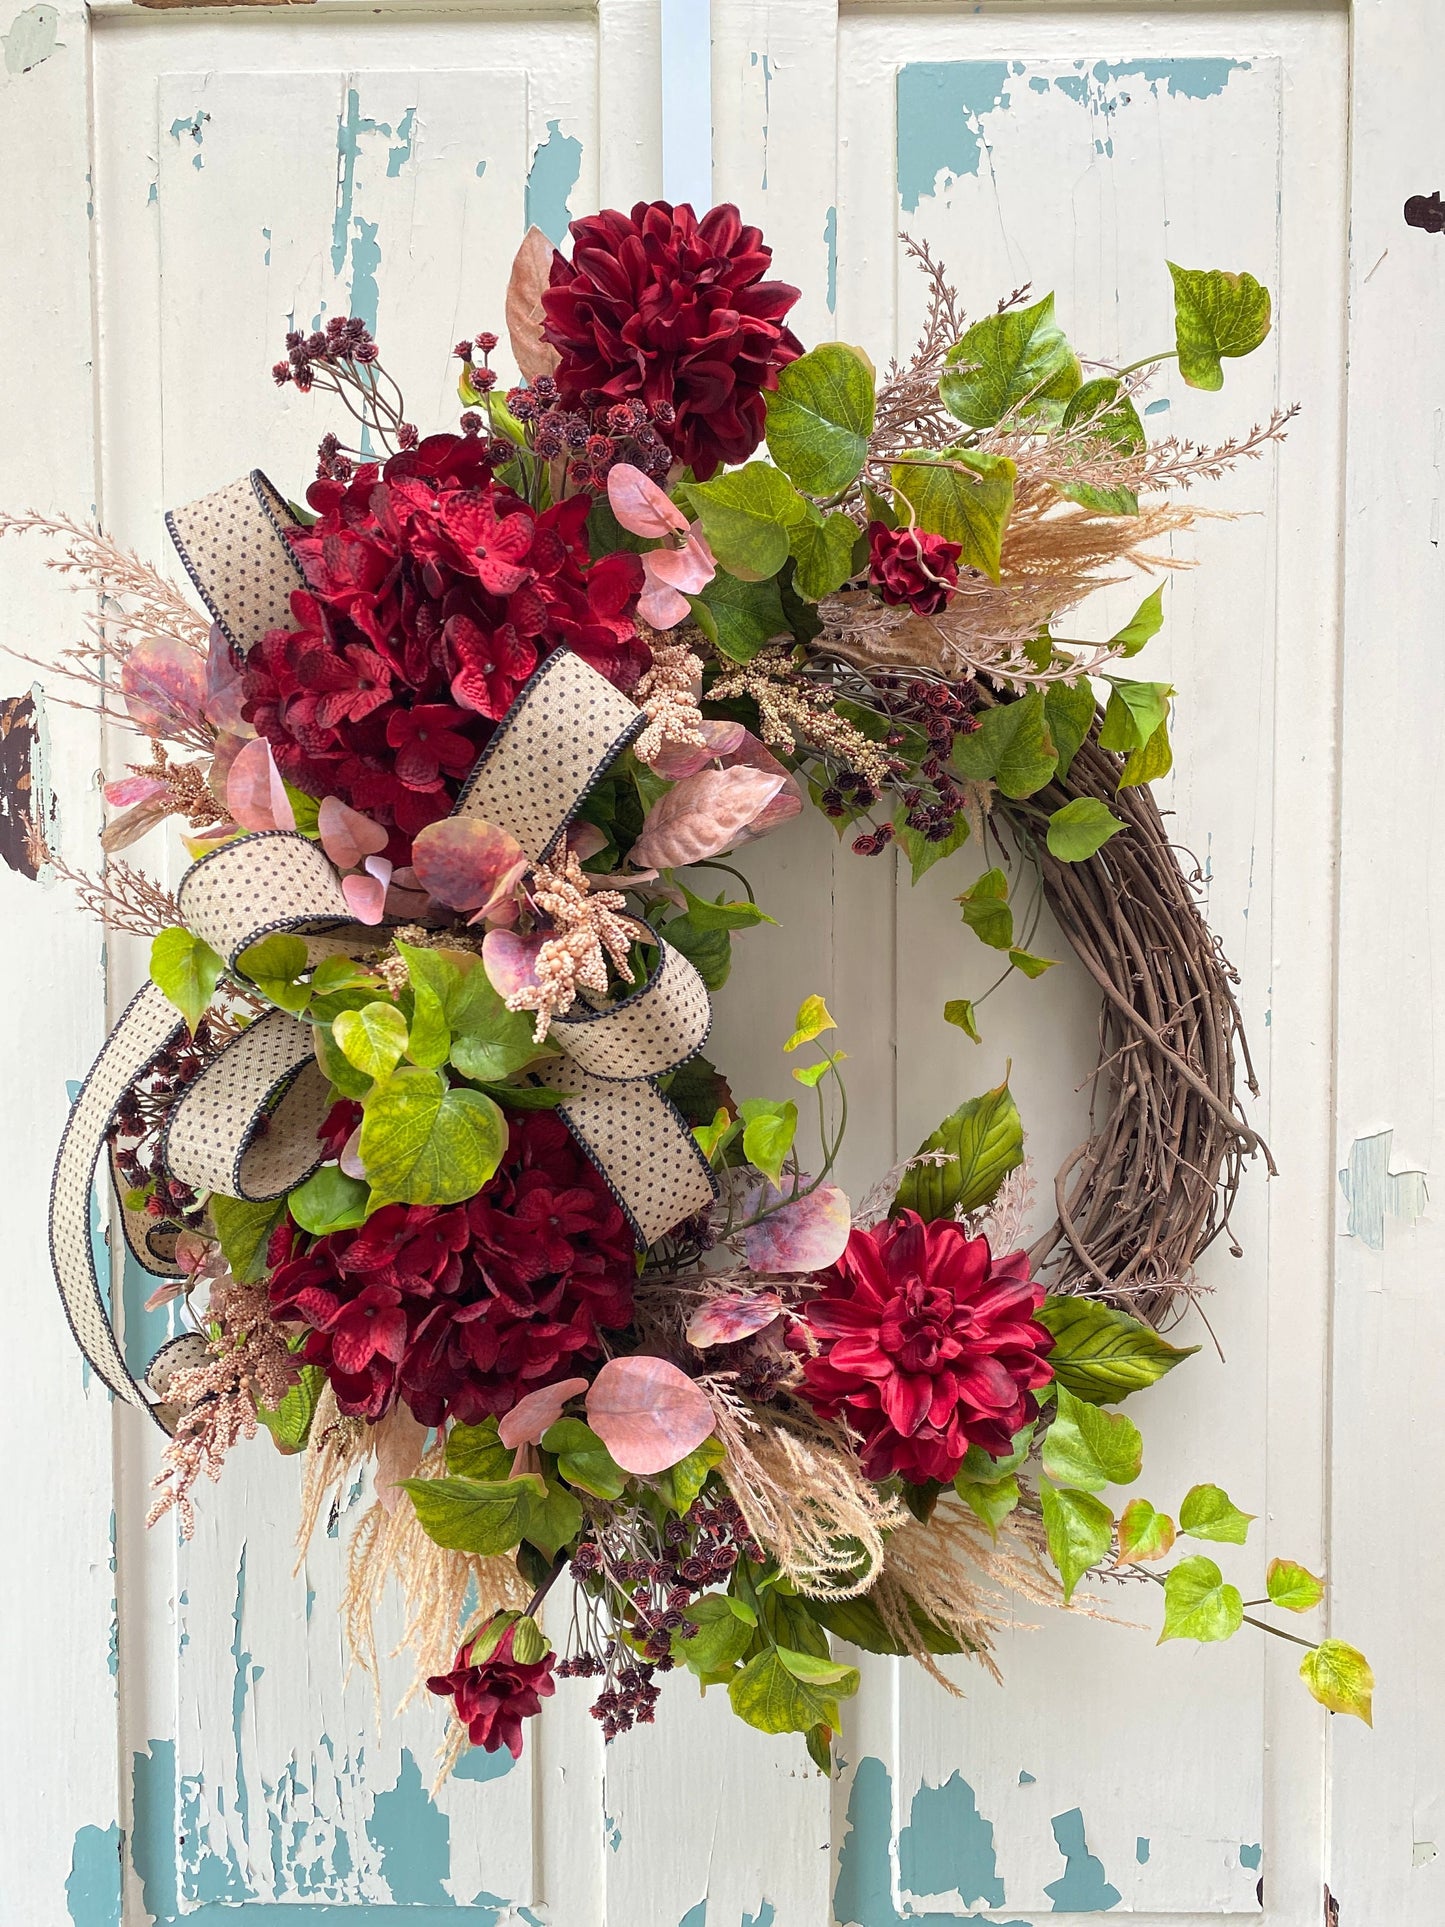 Burgundy Hydrangea and Dahlia Fall Wreath, Faux Floral Wreath for Front Door, Autumn Door Wreath, Thanksgiving Floral Grapevine Wreath